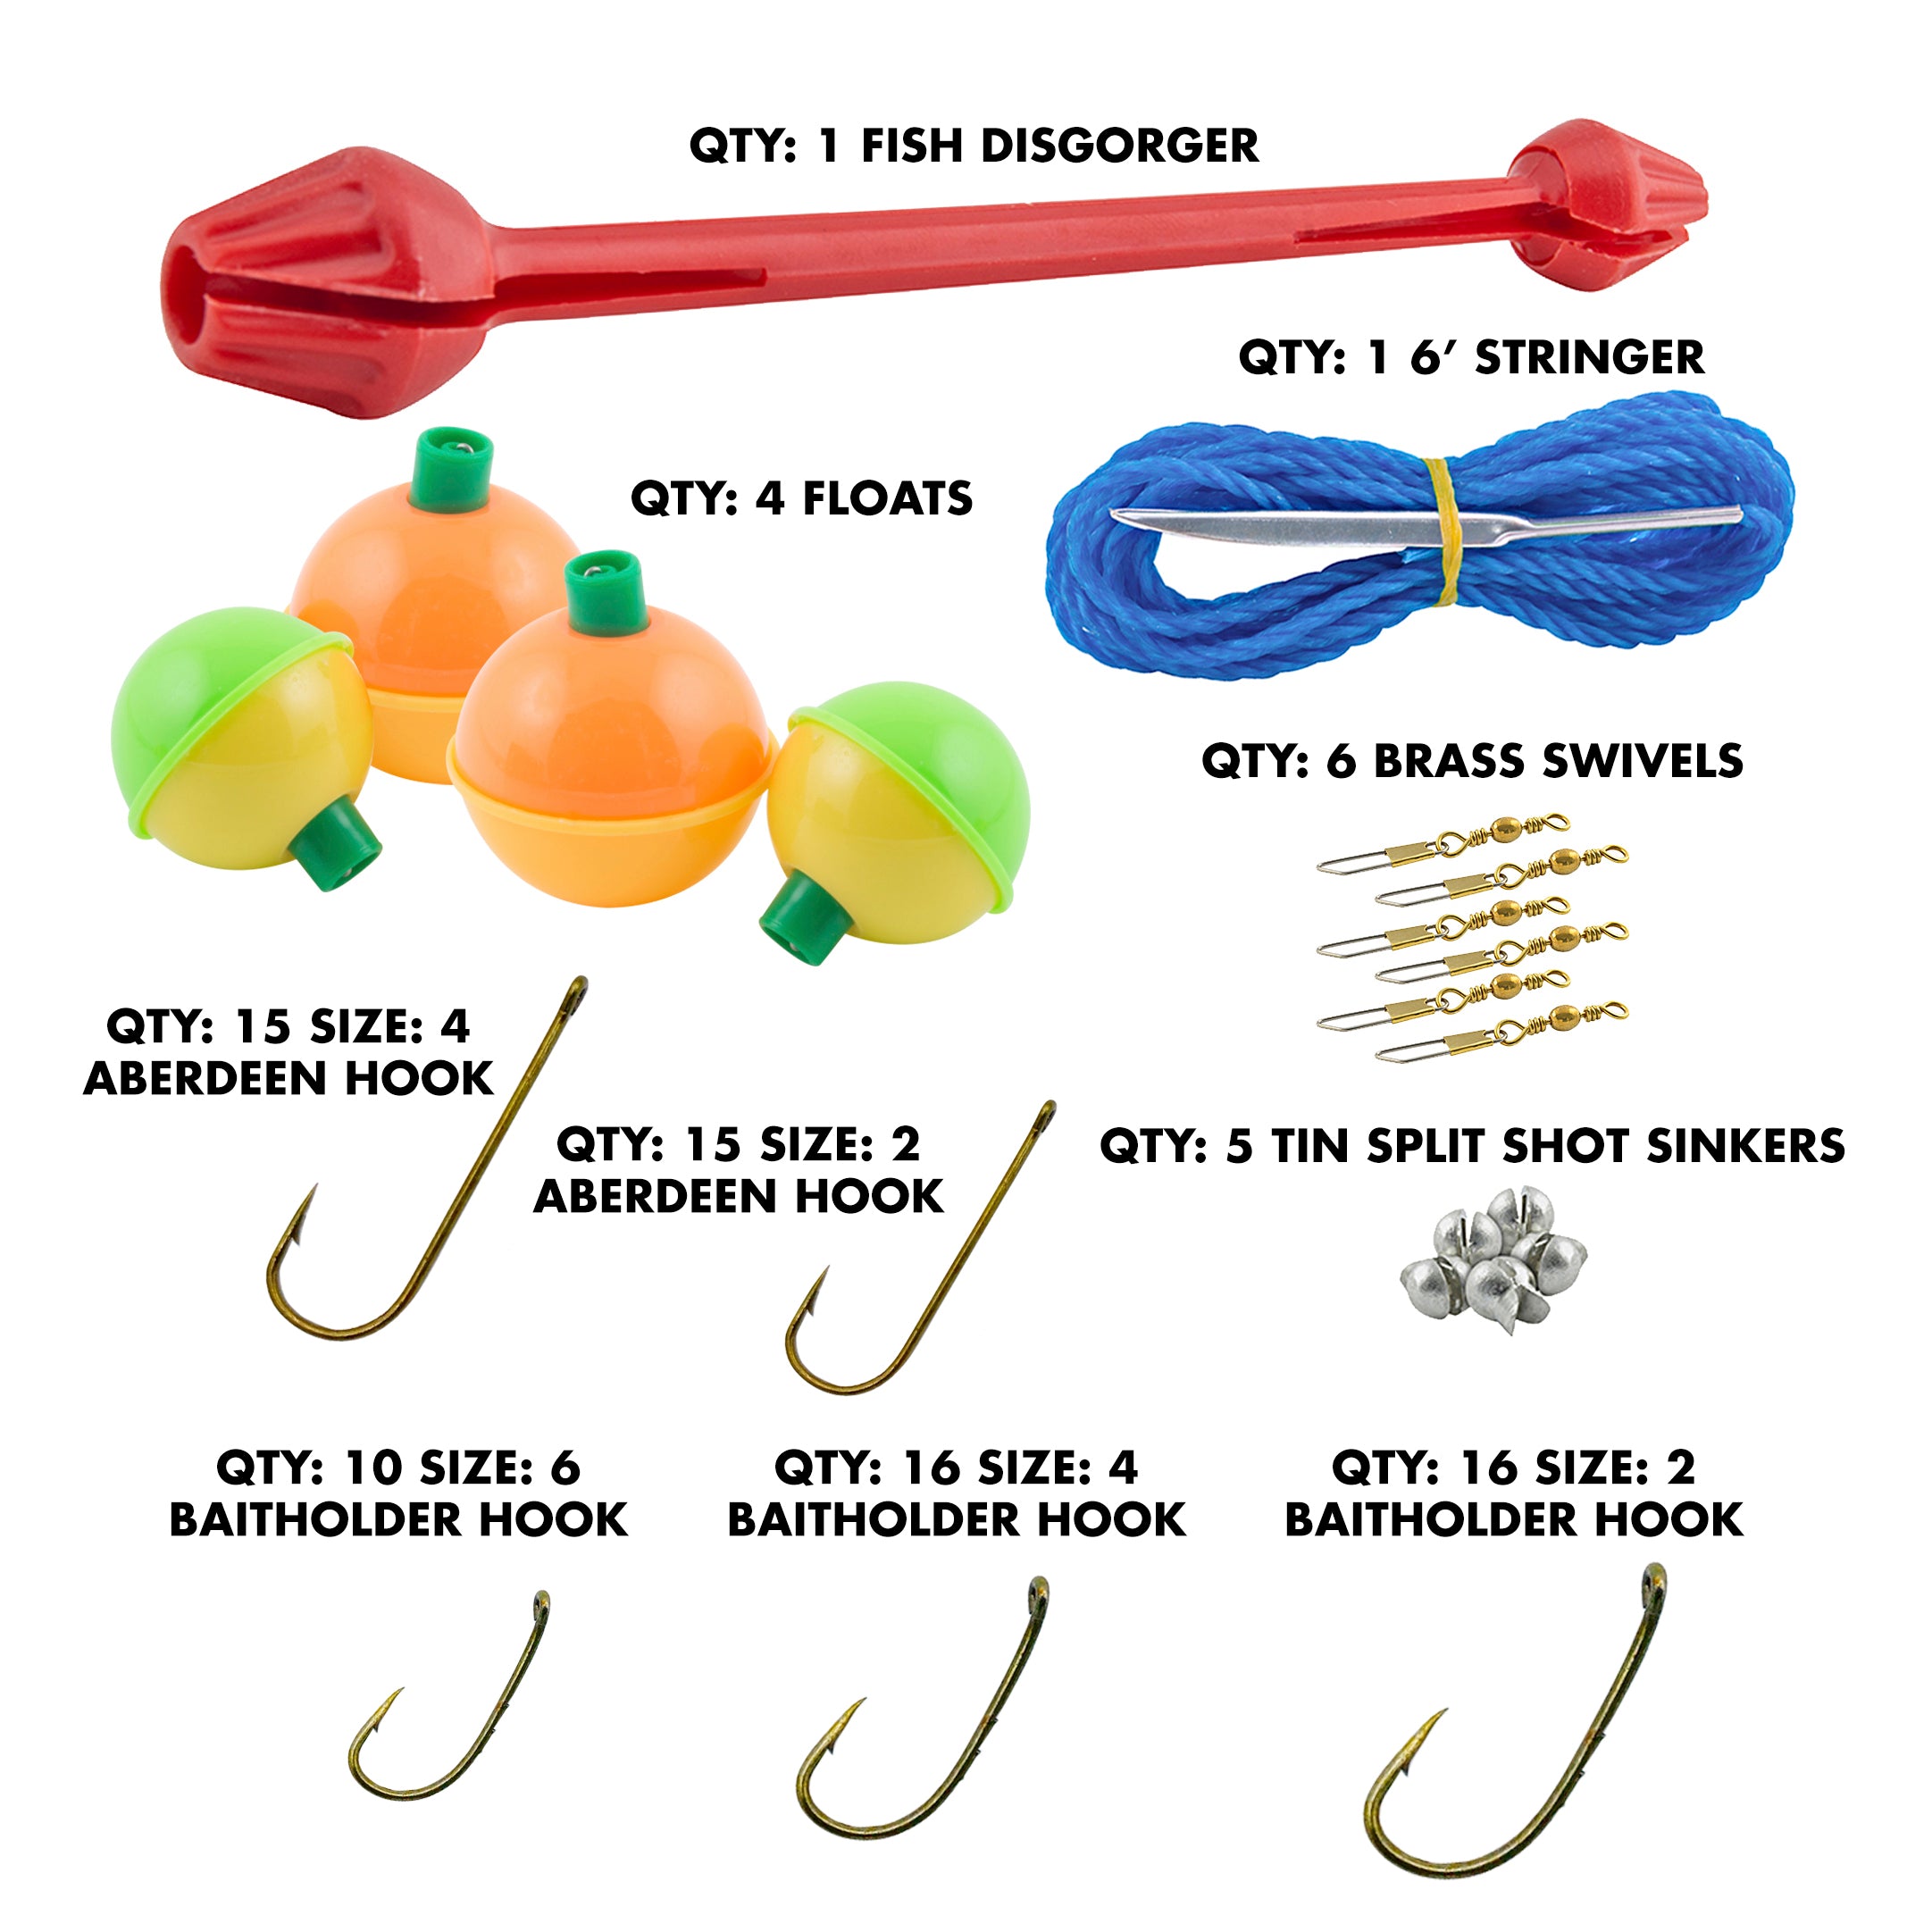 South Bend WG-TB88-B Wormgear 88 pc Tackle Box Pink  (floaters,hooks,stringer etc